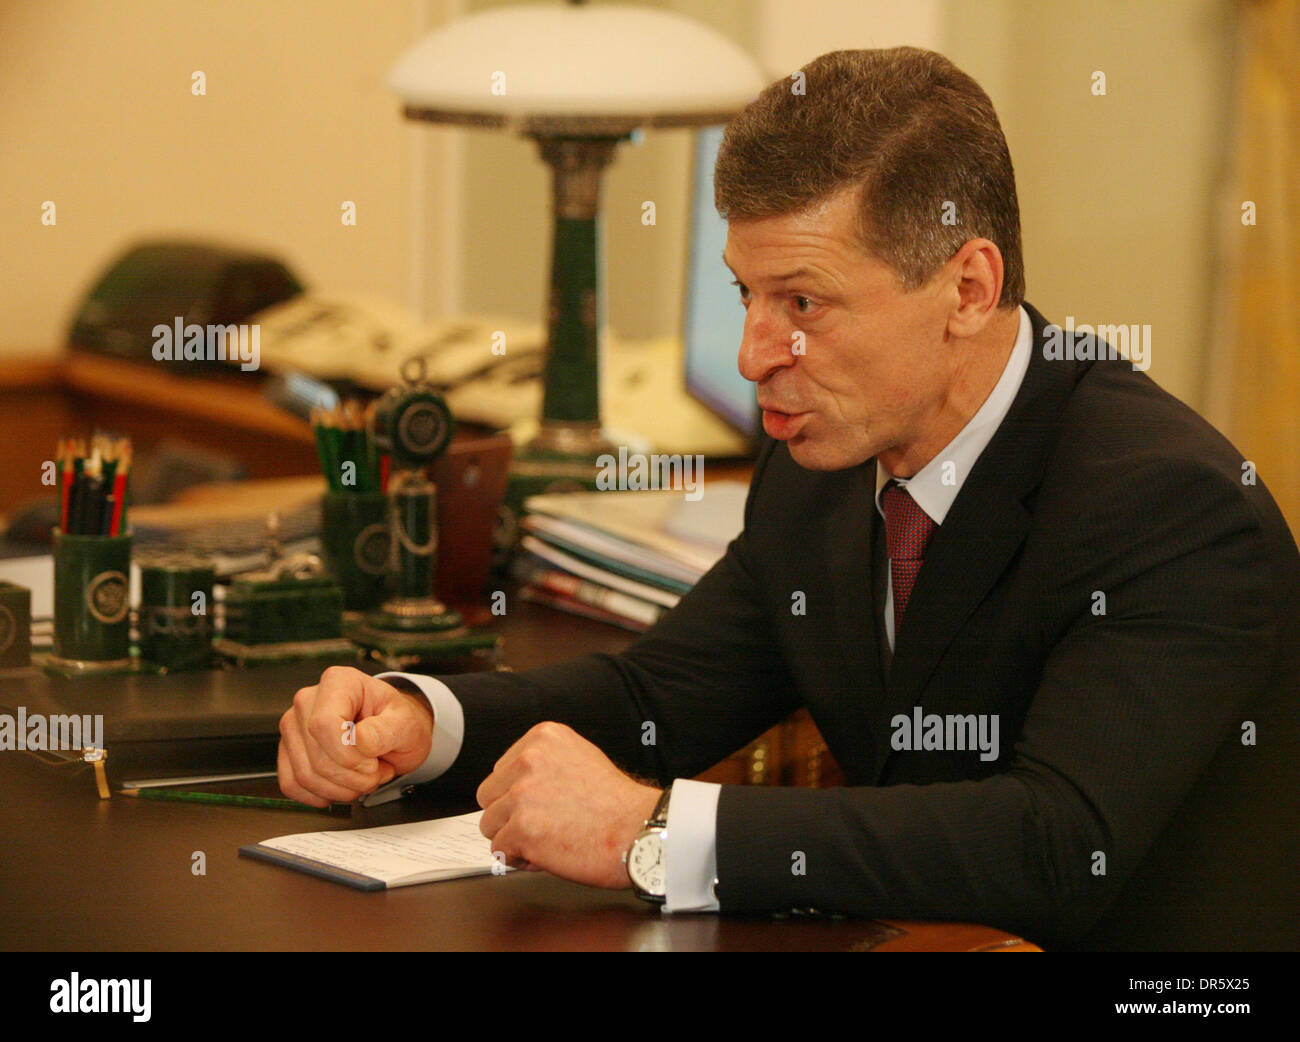 Dec 23, 2008 - Moscow, Russia - Prime-minister of Russia Vladimir Putin (not pictured) at the meeting with his deputy DMITRY KOZAK. Dmitry Kozak is known as a close ally of Vladimir Putin and one of the key figures in the presidential team. (Credit Image: © PhotoXpress/ZUMA Press) RESTRICTIONS: * North and South America Rights Only * Stock Photo